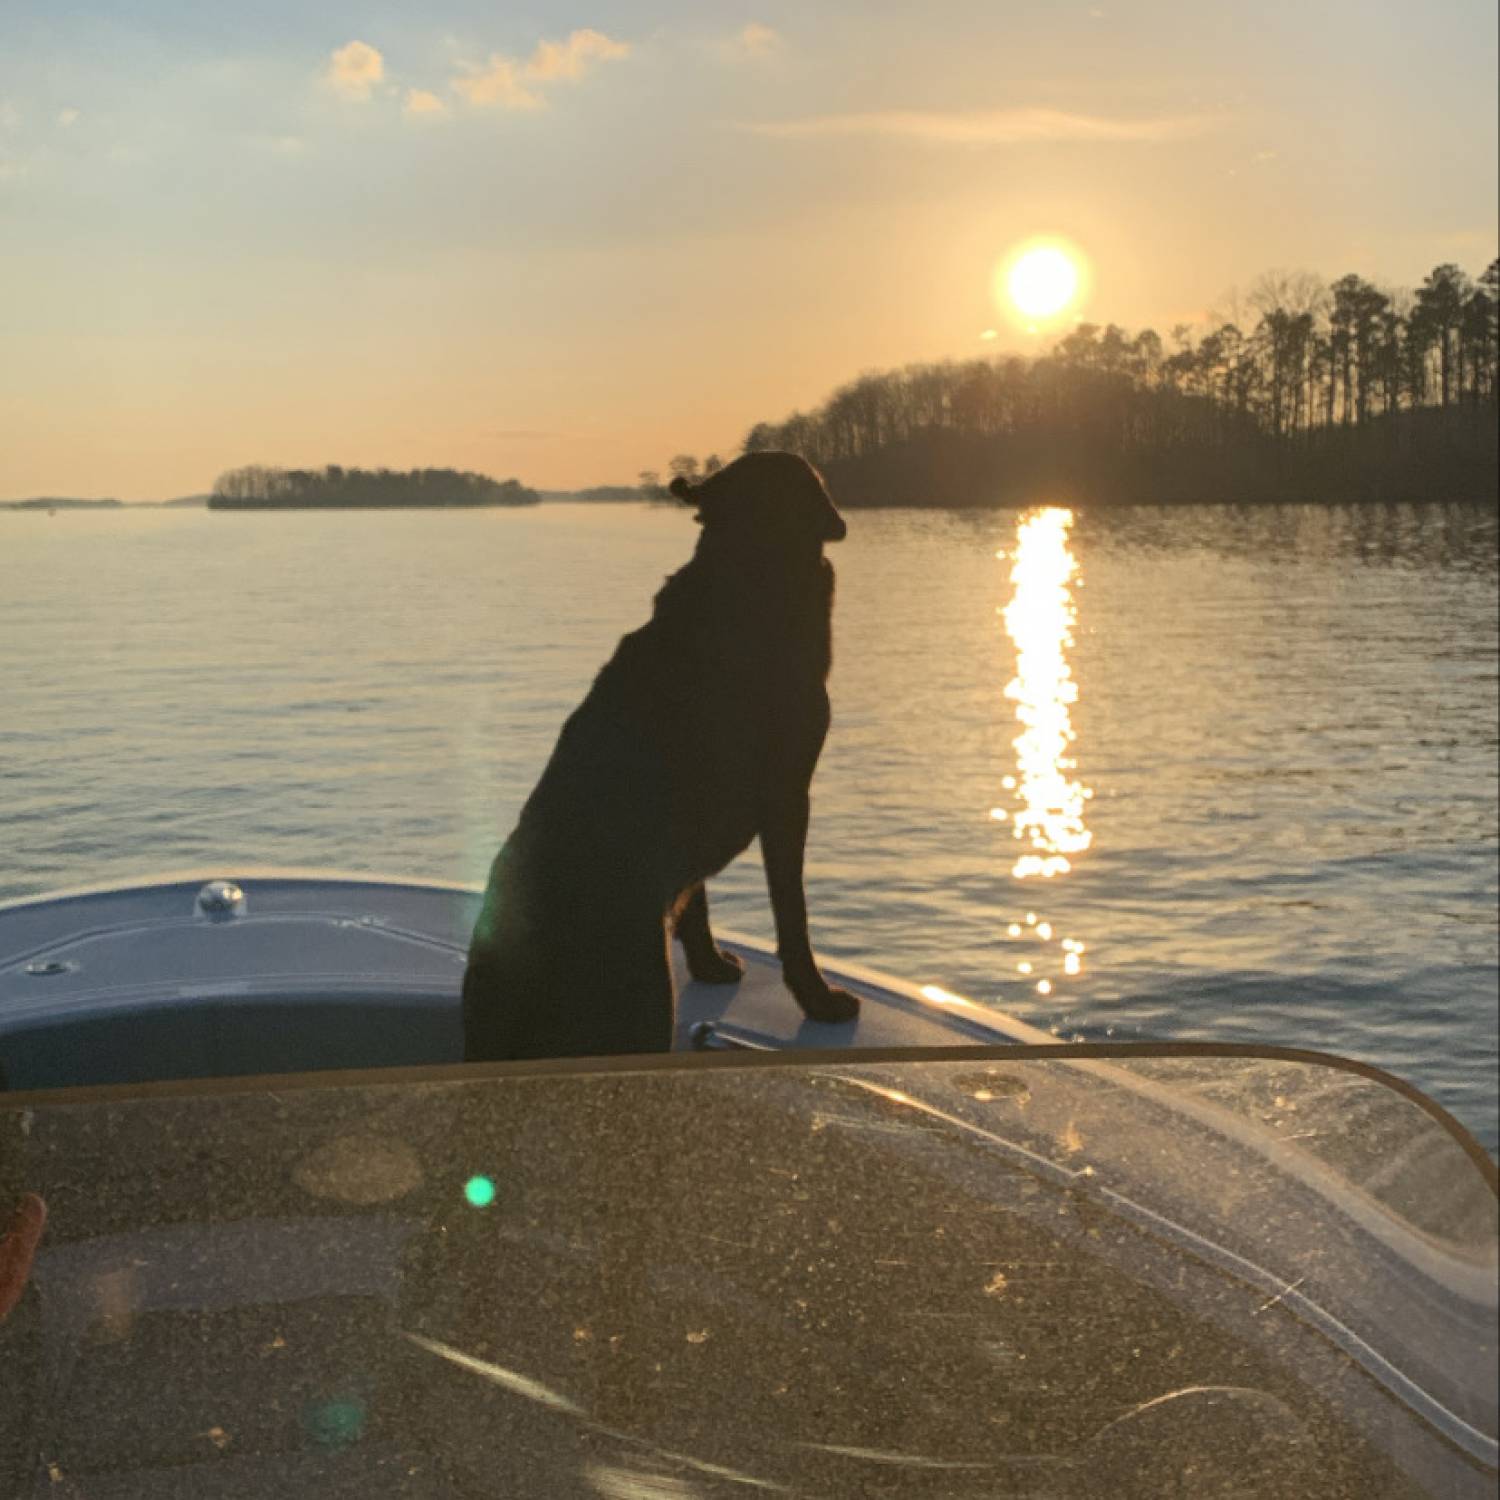 Title: Sunset Cruise - On board their Sportsman Open 232 Center Console - Location: Lake Lanier. Participating in the Photo Contest #SportsmanSeptember